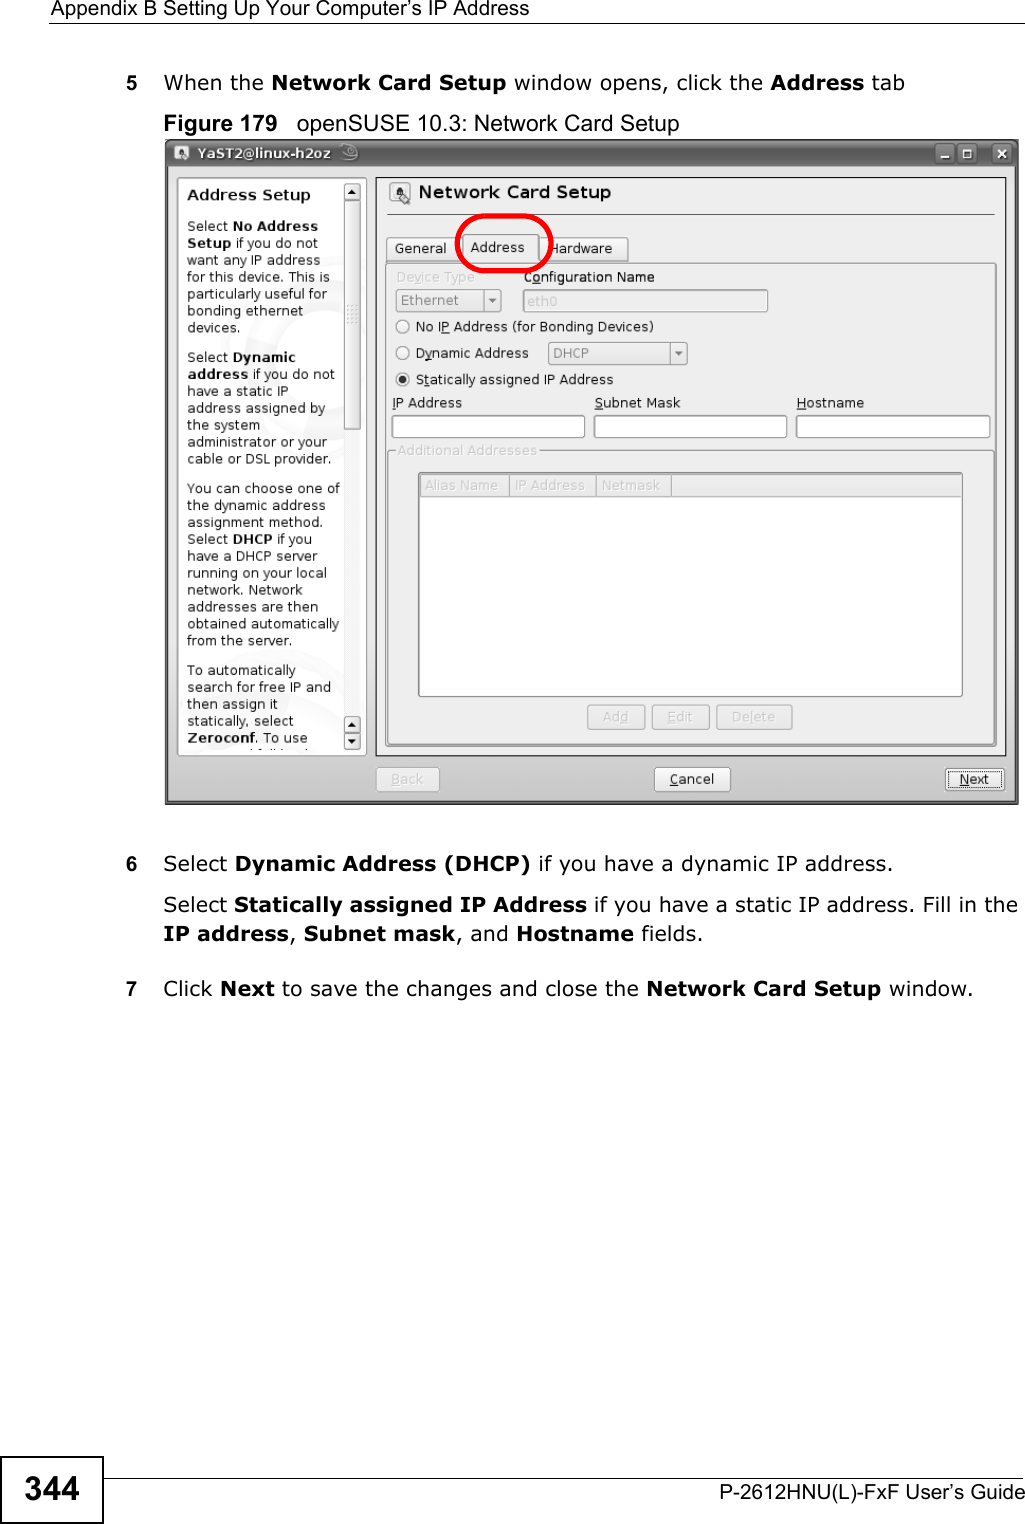 Appendix B Setting Up Your Computer’s IP AddressP-2612HNU(L)-FxF User’s Guide3445When the Network Card Setup window opens, click the Address tabFigure 179   openSUSE 10.3: Network Card Setup6Select Dynamic Address (DHCP) if you have a dynamic IP address.Select Statically assigned IP Address if you have a static IP address. Fill in the IP address, Subnet mask, and Hostname fields.7Click Next to save the changes and close the Network Card Setup window. 